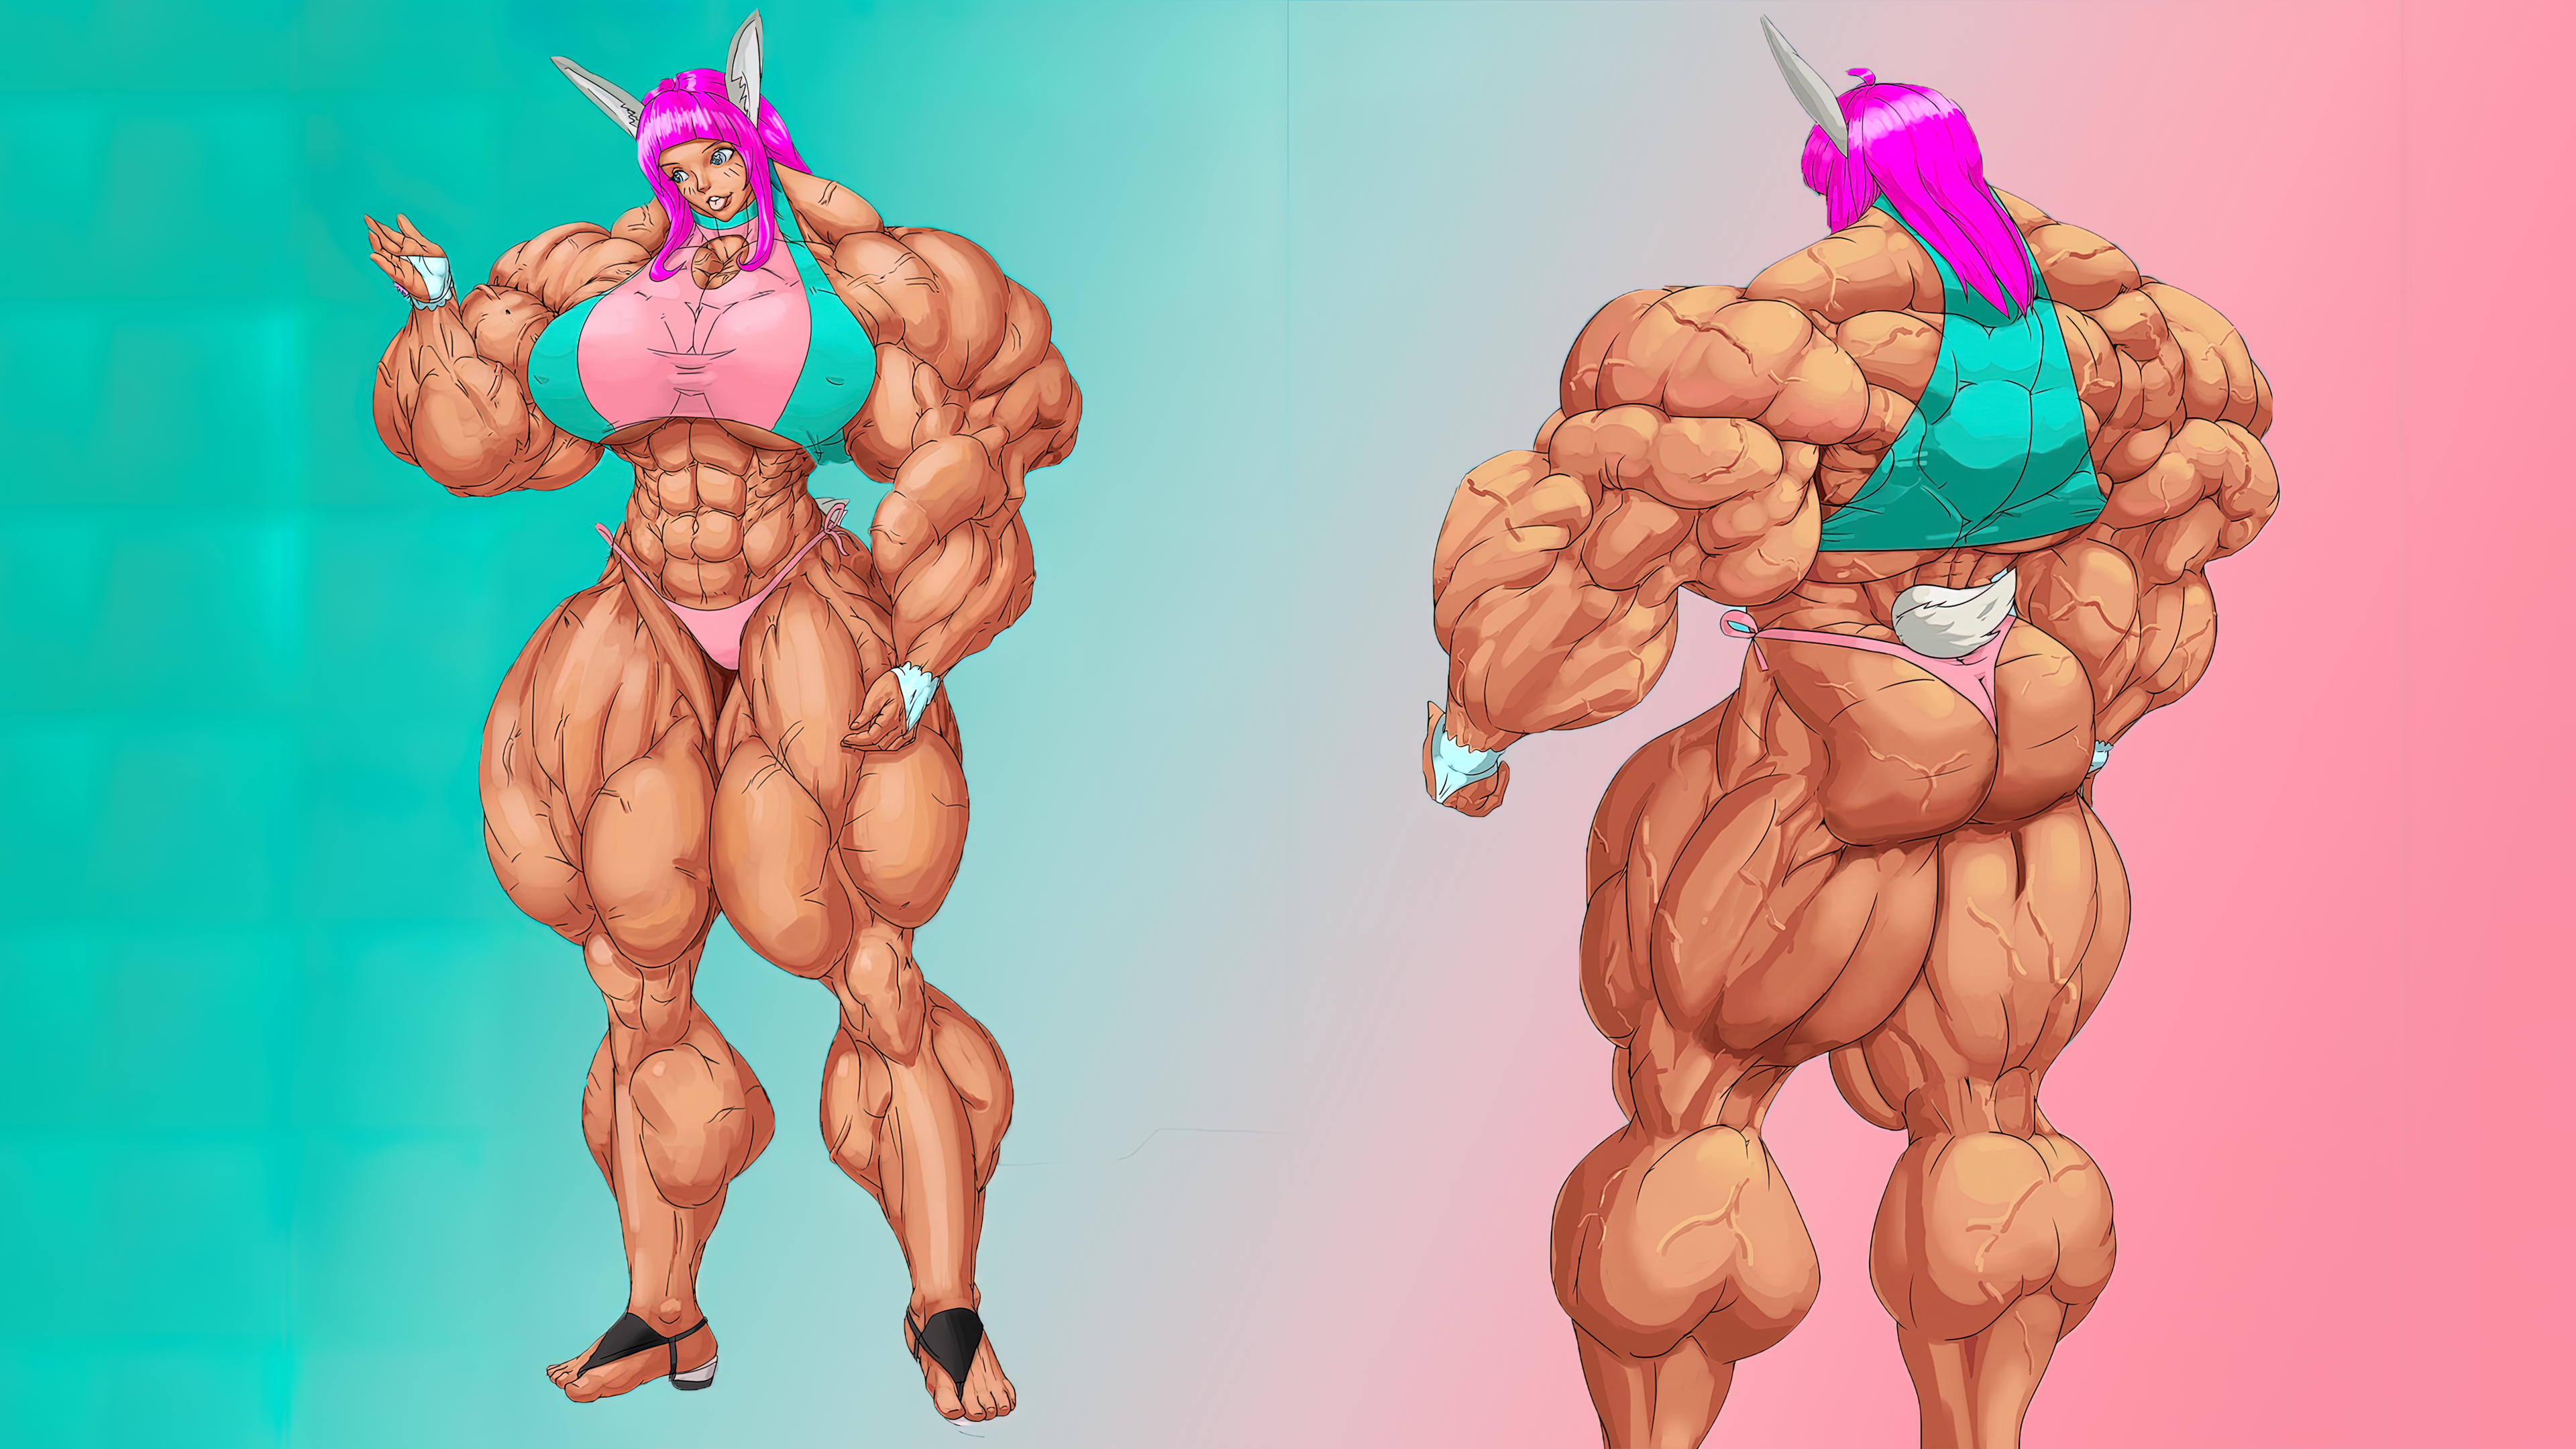 Anime 3840x2160 muscles muscular 6-pack abs anime girls toned female artwork biceps strong woman bikini bottoms ass minimalism gradient bunny ears bunny girl bunny tail